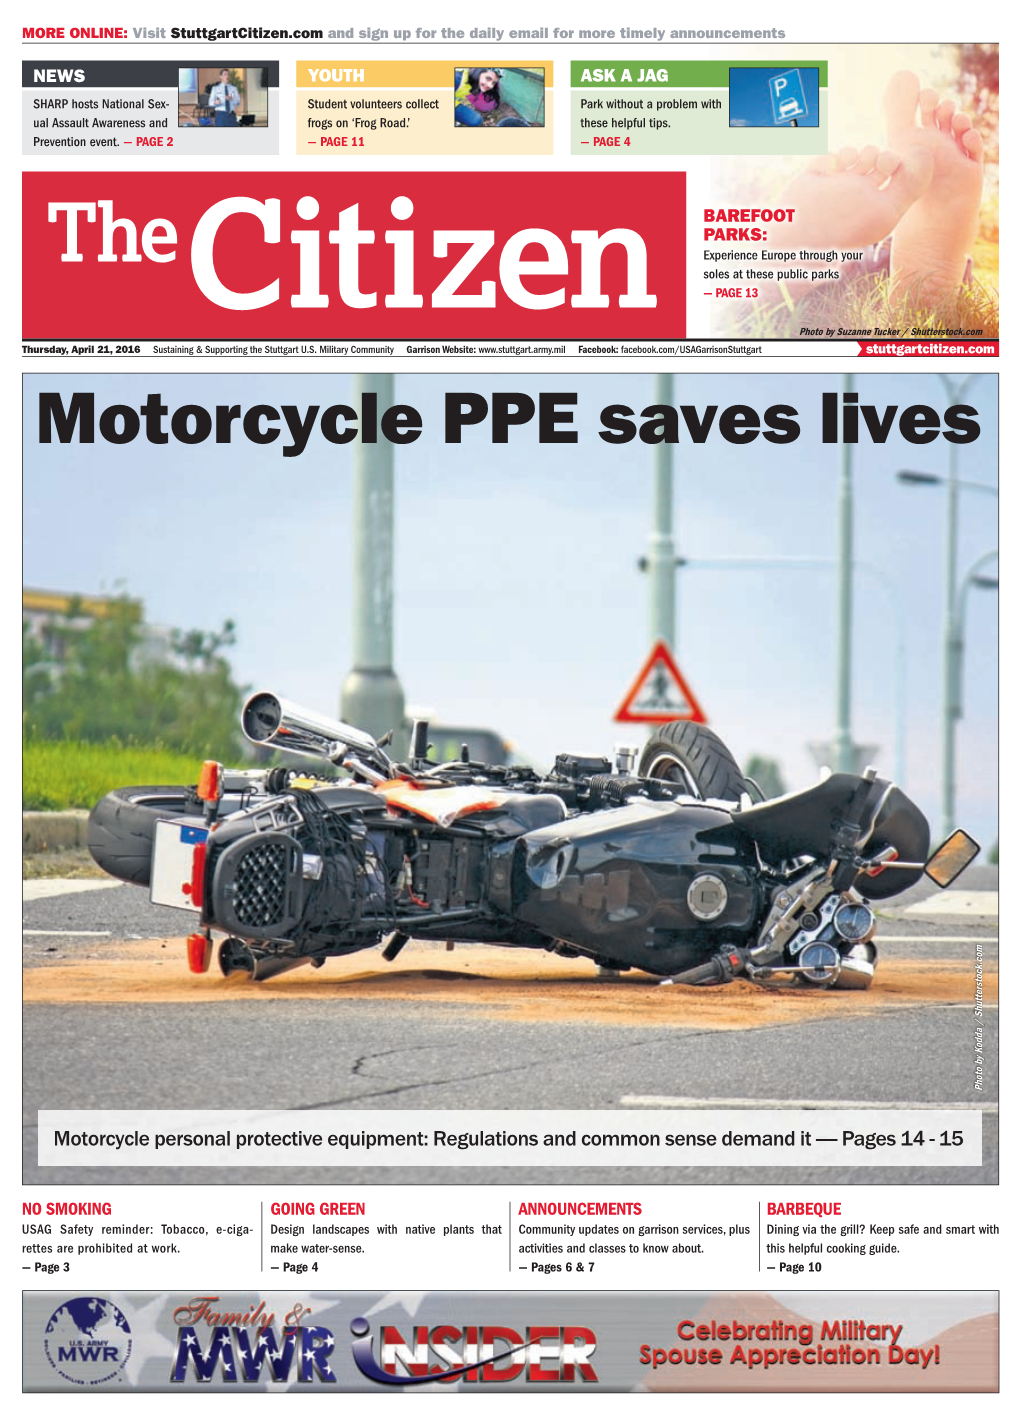 Motorcycle PPE Saves Lives